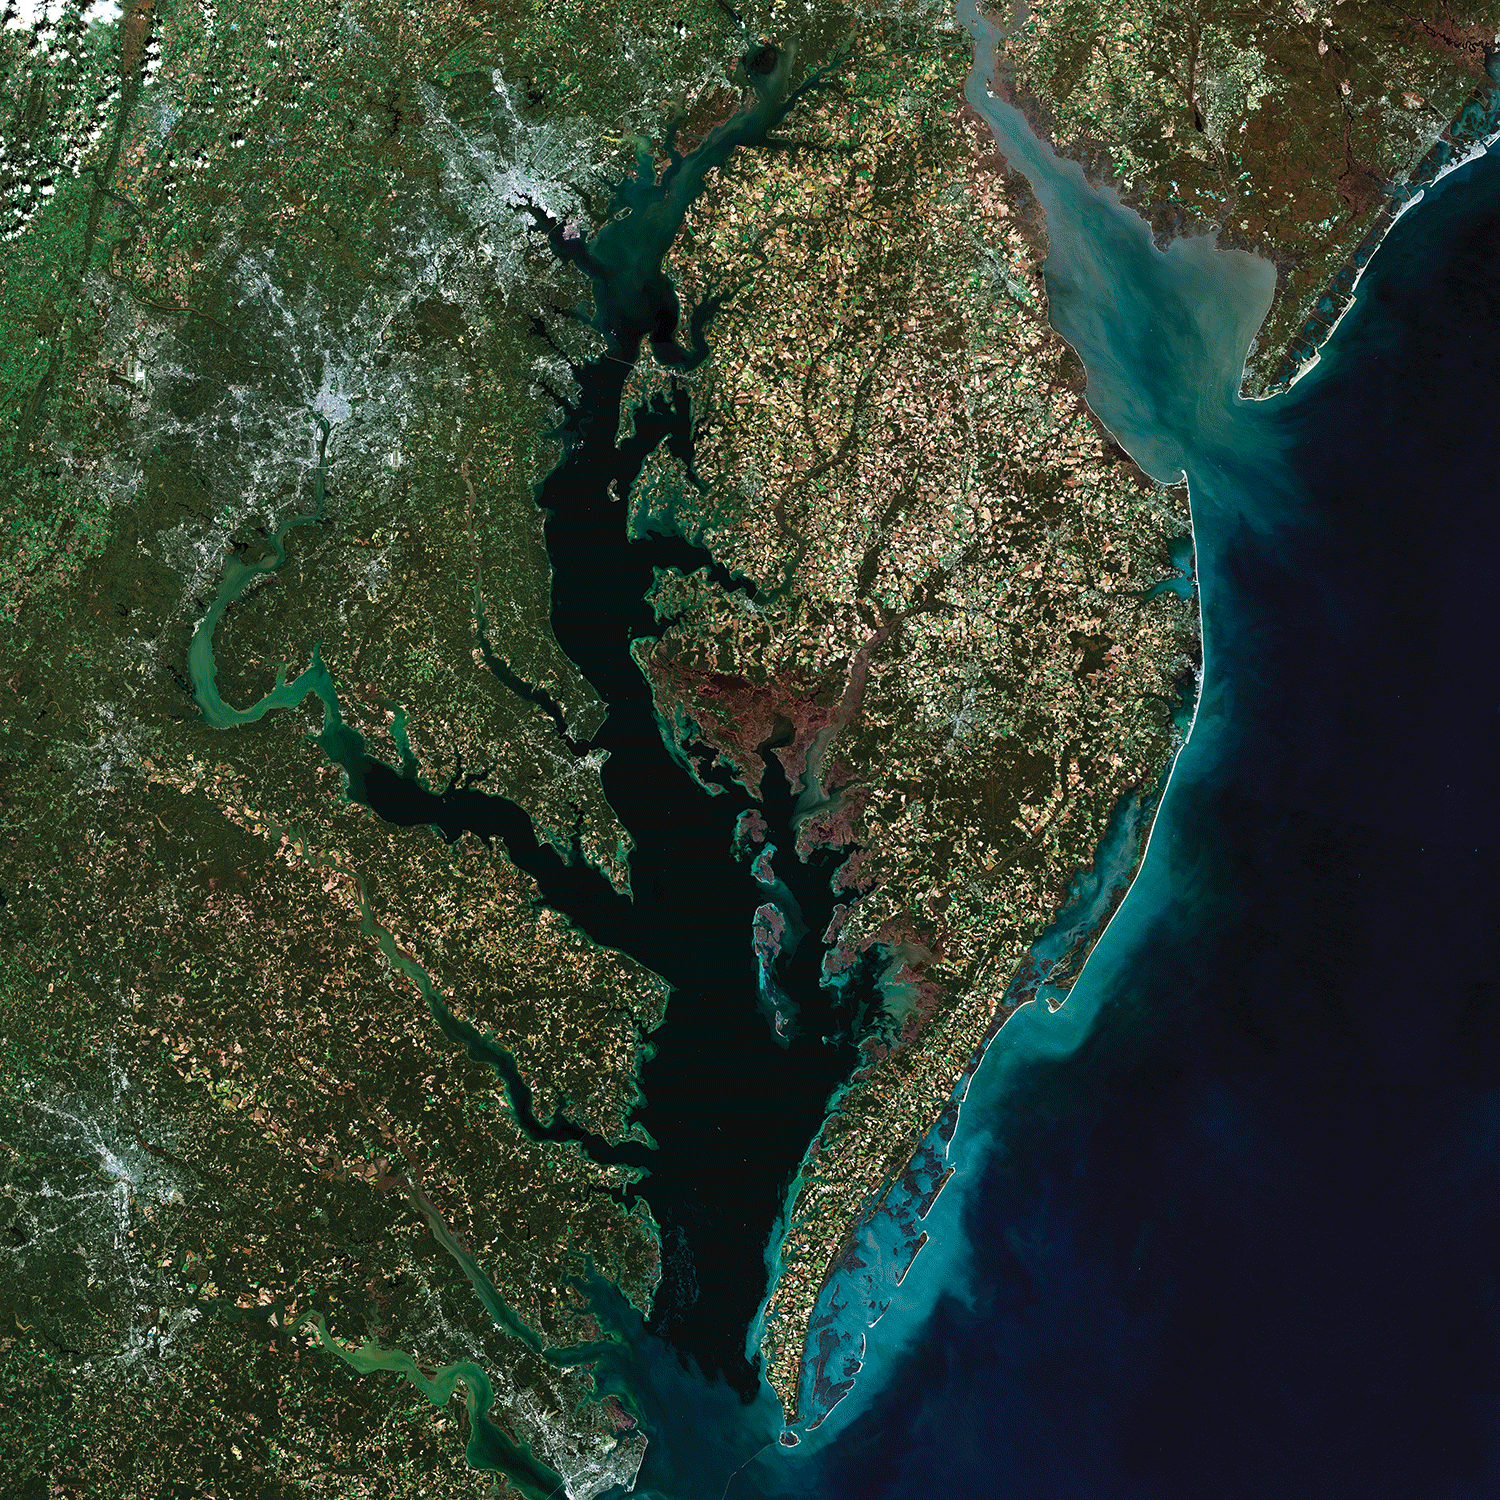 This image of the Chesapeake Bay, America’s largest estuary, was created using Provisional
                        Surface Reflectance data from five Landsat 8 scenes acquired in October and November
                        2014.